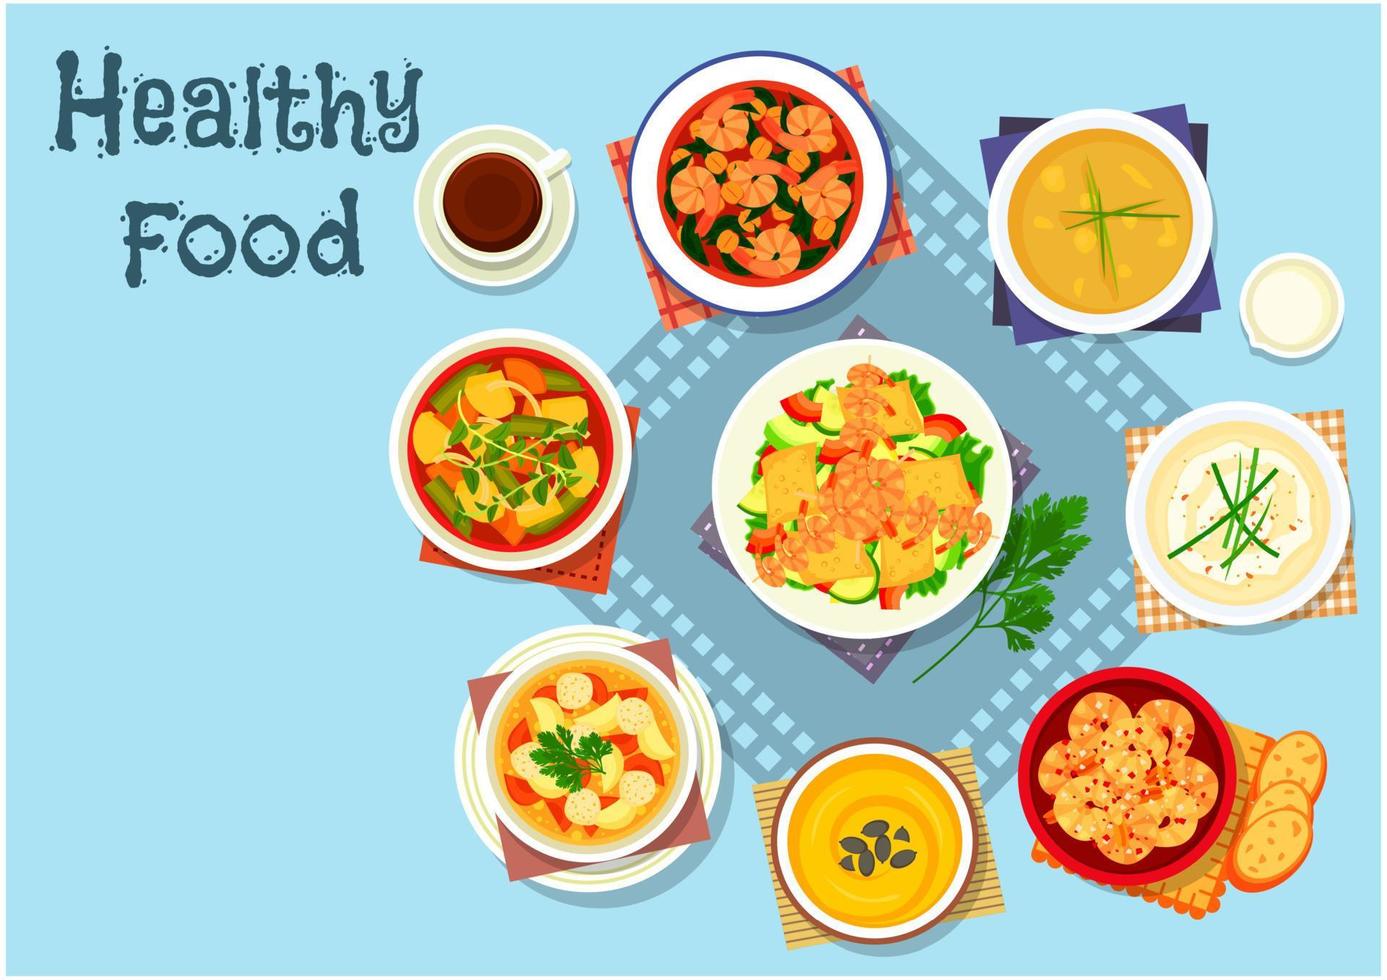 Rich soup and seafood dishes icon, food design vector